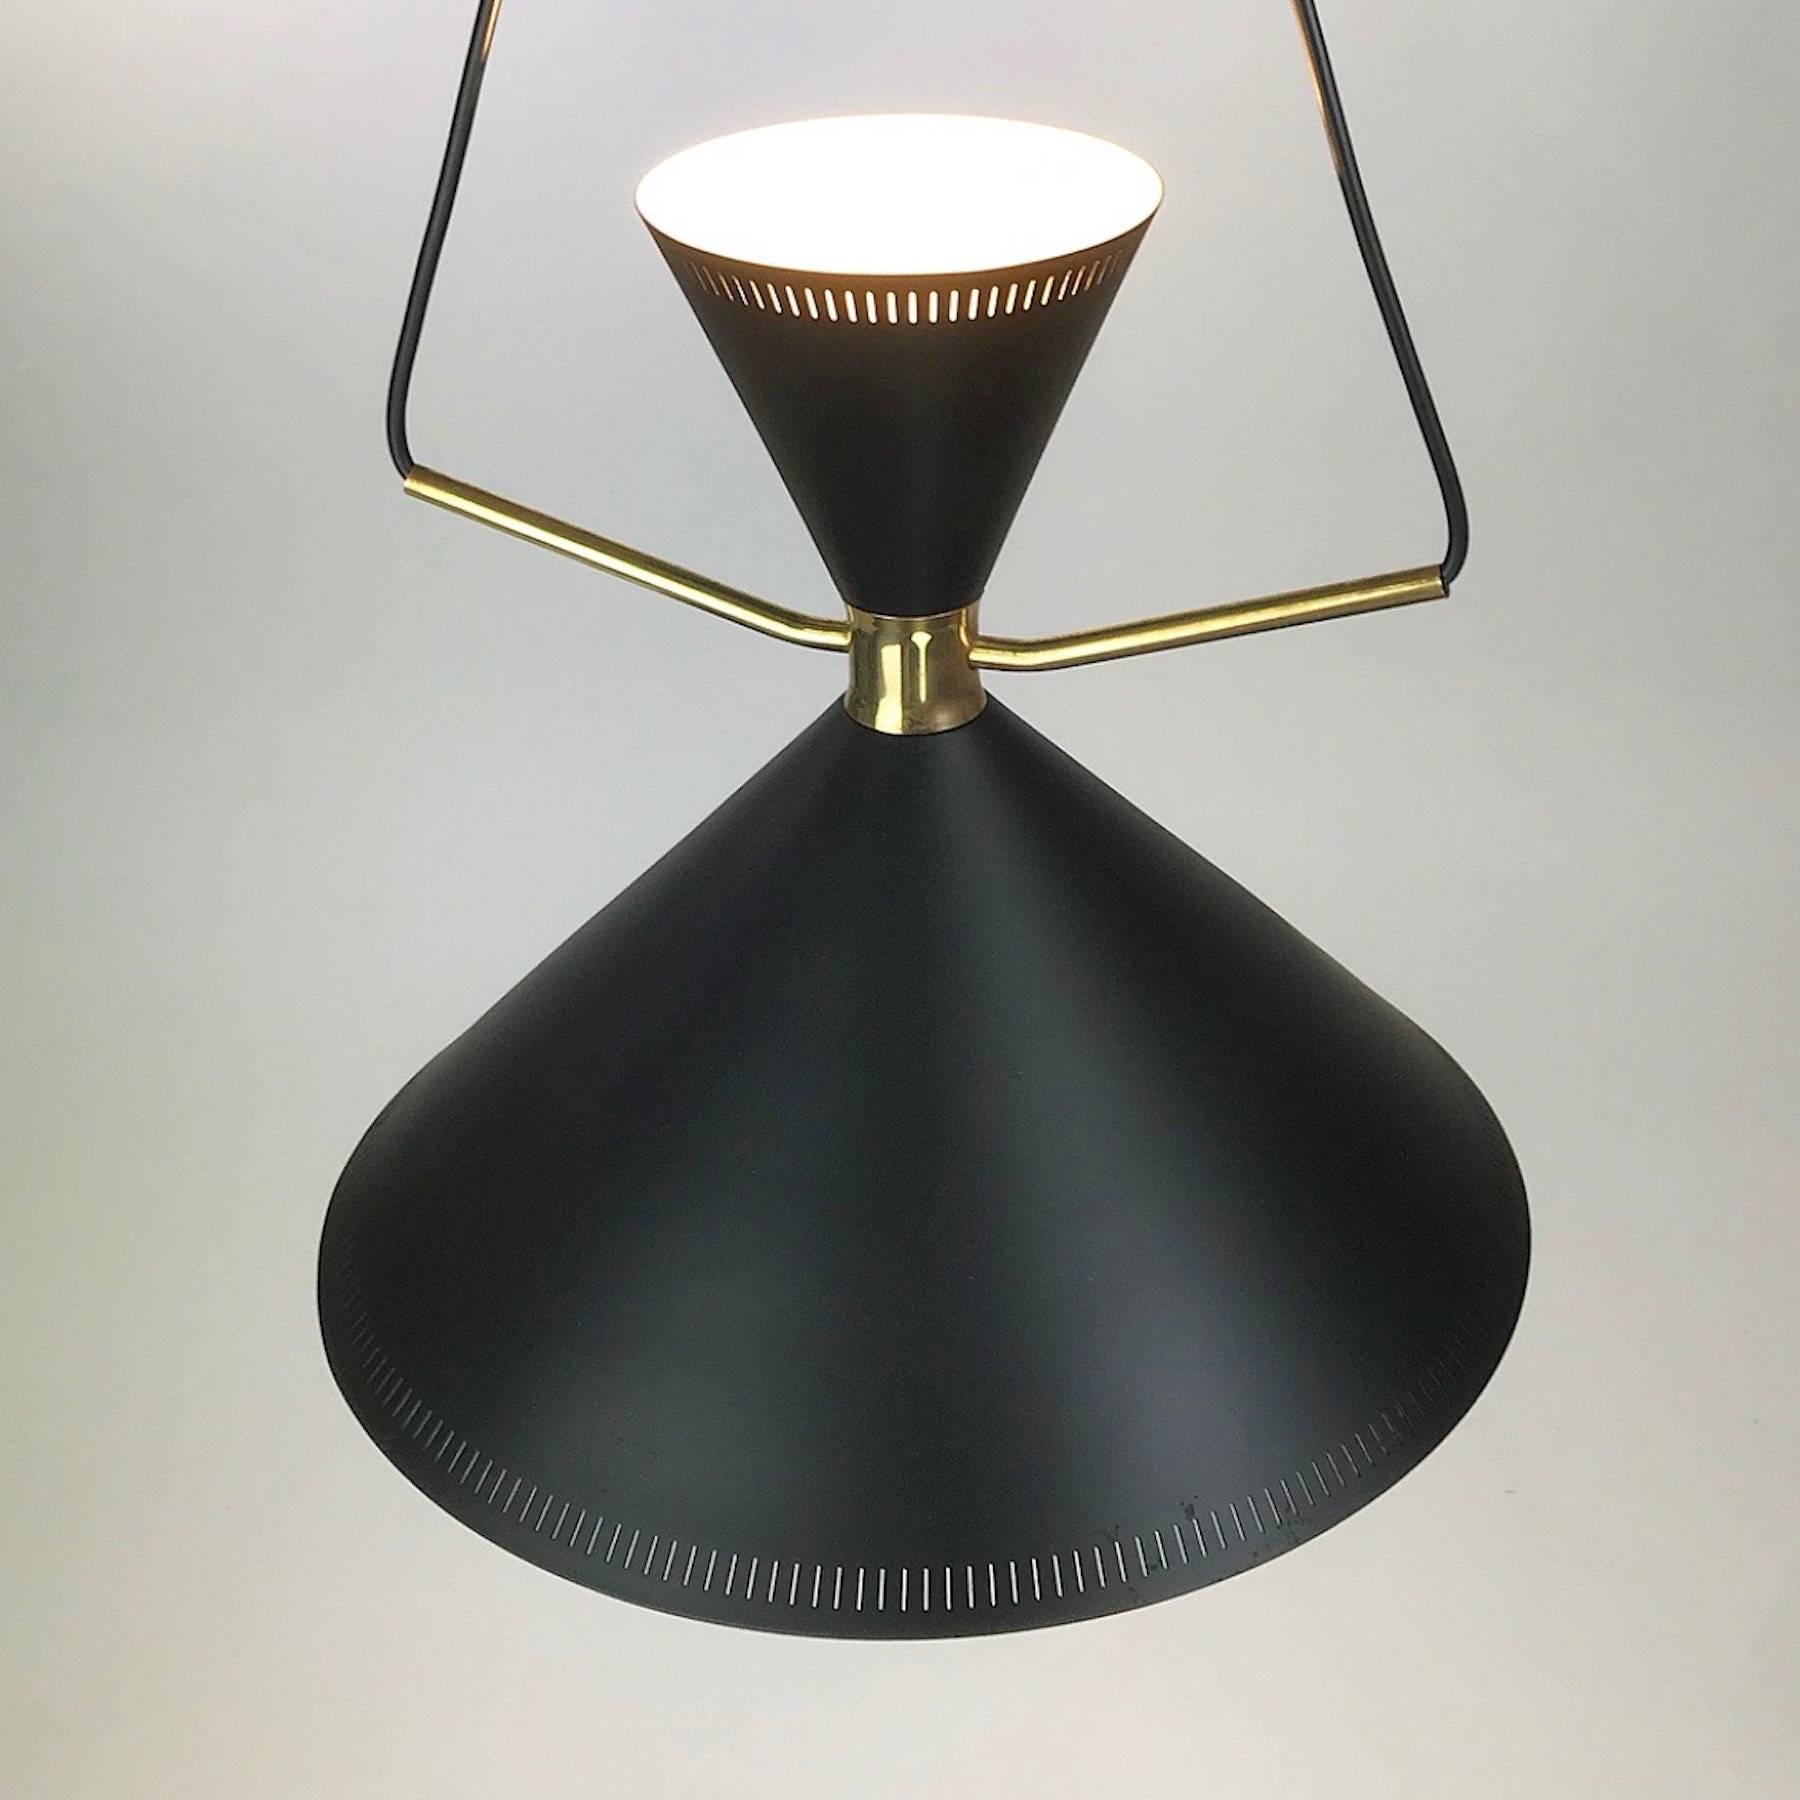 Are you looking for a beautiful and extremely rare Mid-Century Modern light for you home, this is going to be the eye catcher you are looking for.

Designed with inspiration from the Italian Stilnovo era this beautiful diablo shaped pendant was